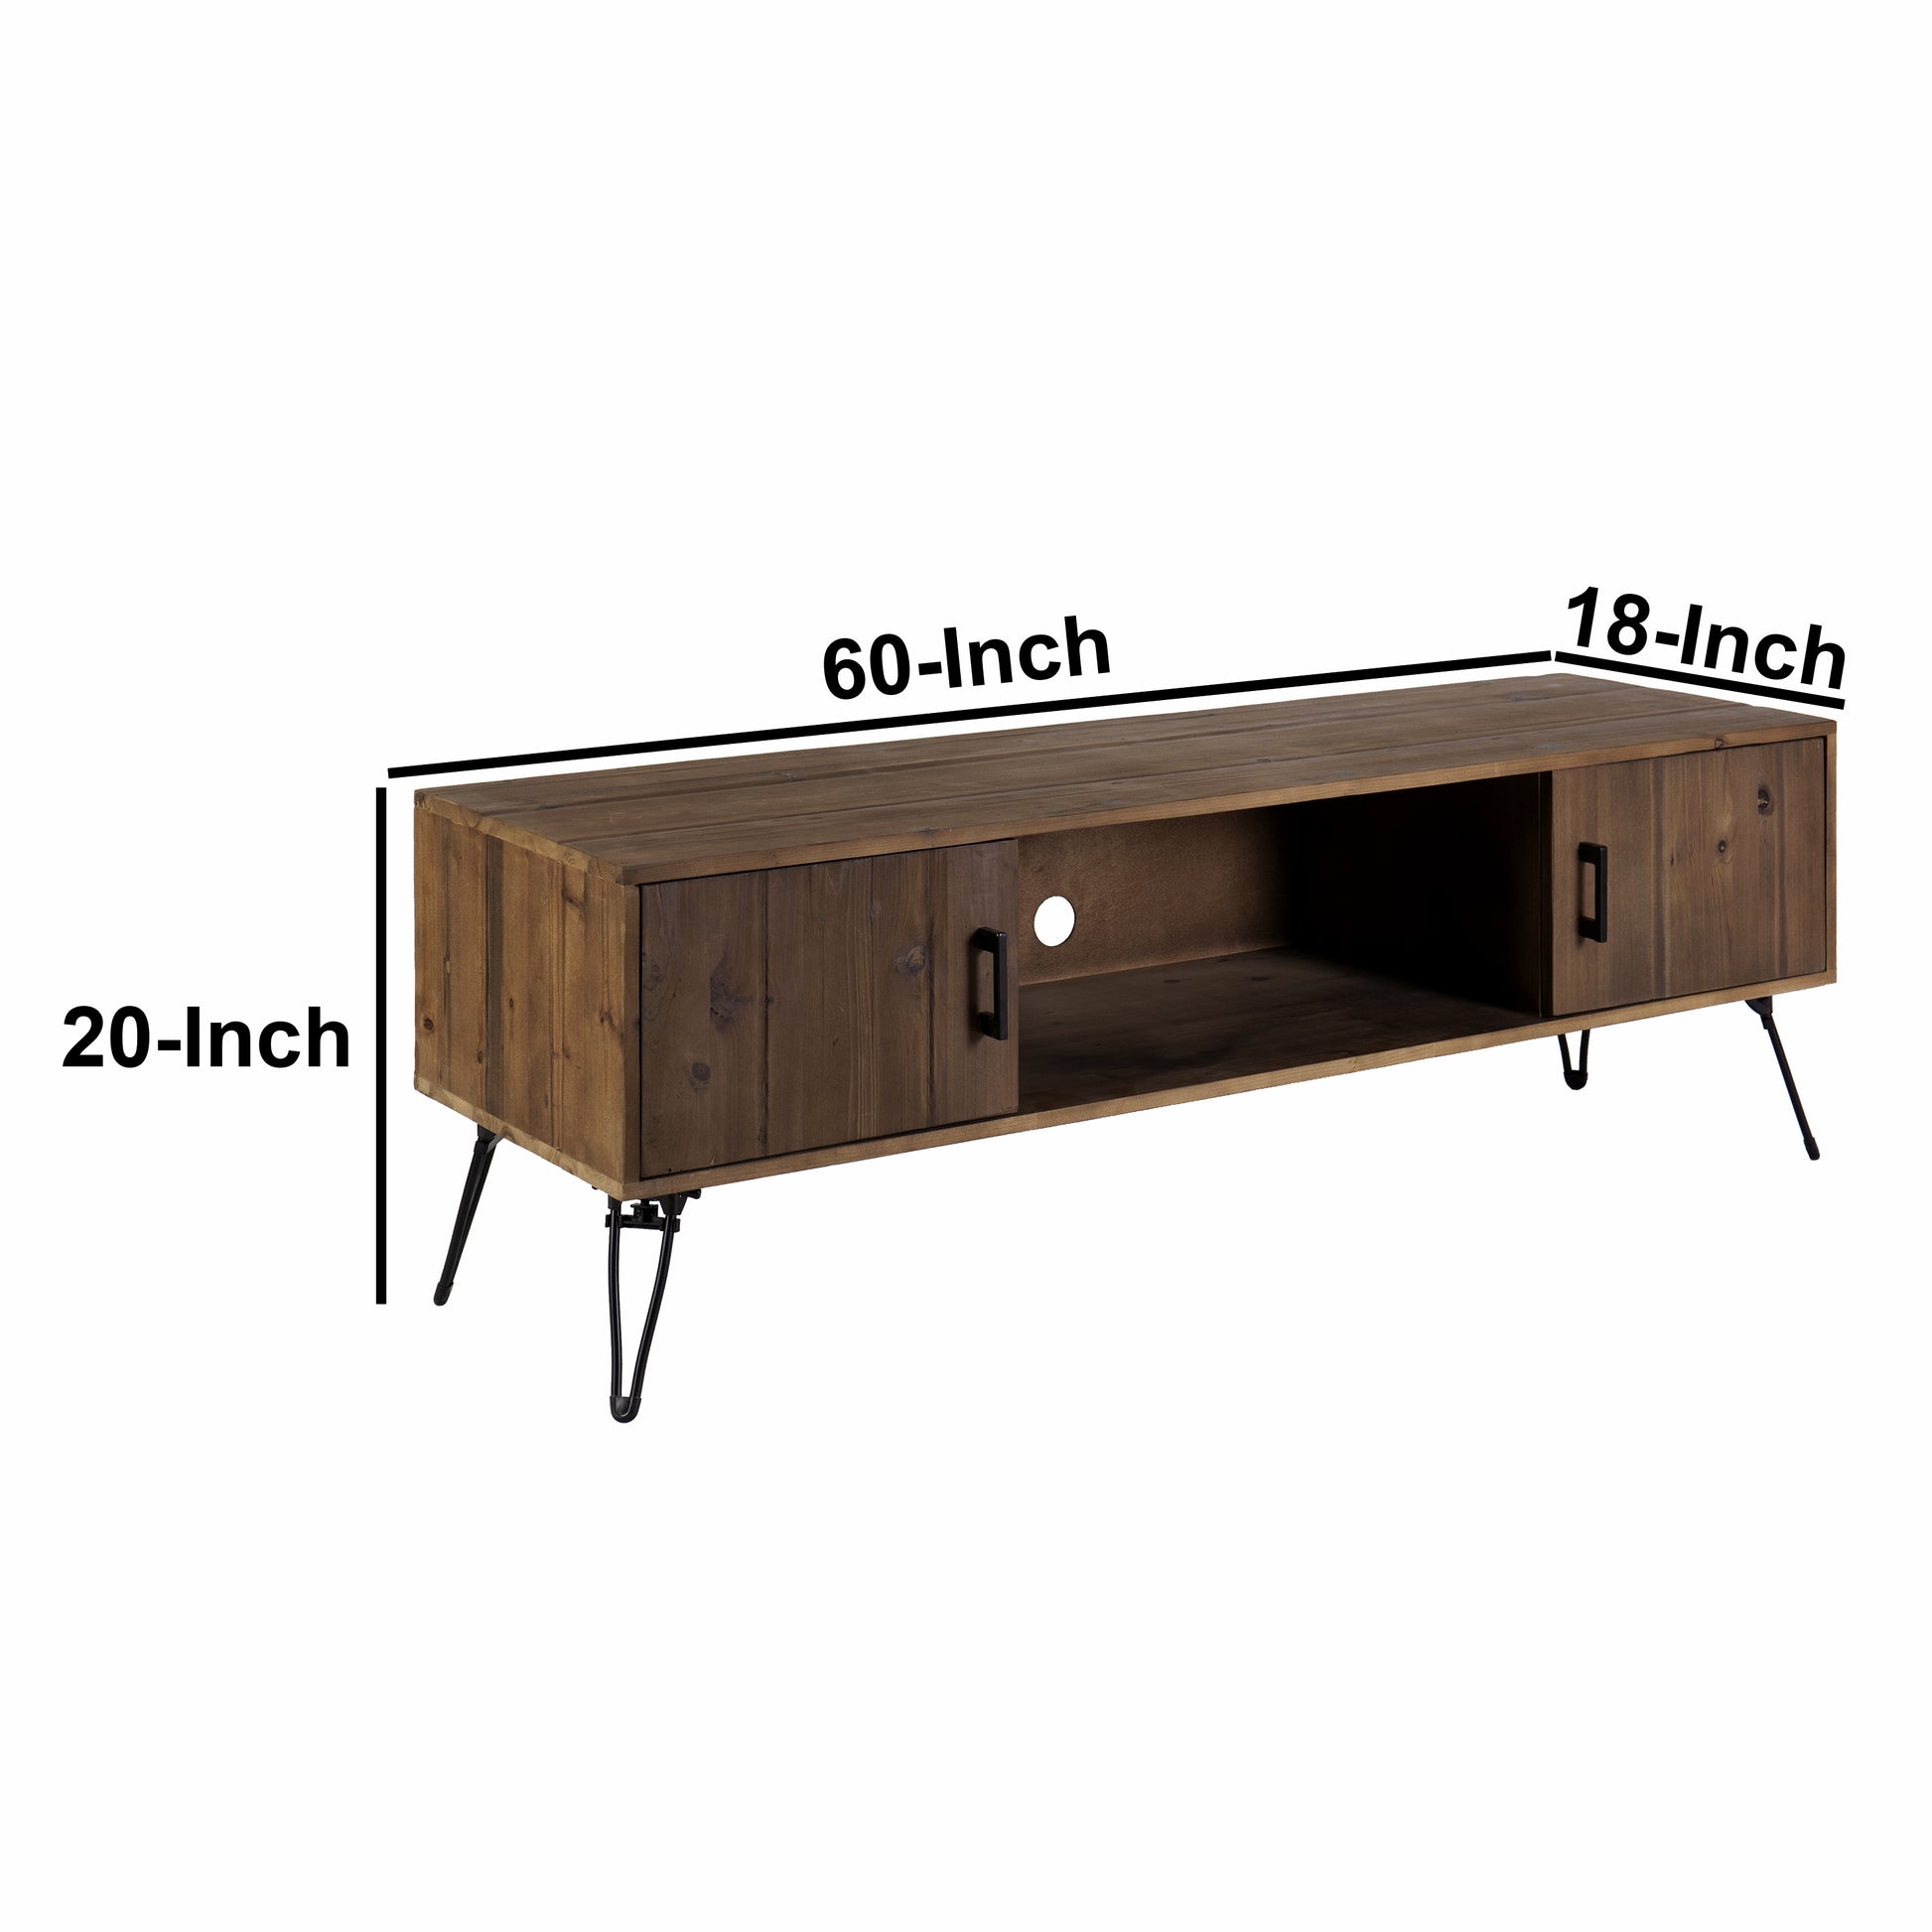 Clive 60 Inch Reclaimed Wood Rectangle Farmhouse TV Stand Media Console 2 Doors Iron Legs Natural Brown By The Urban Port UPT-273092